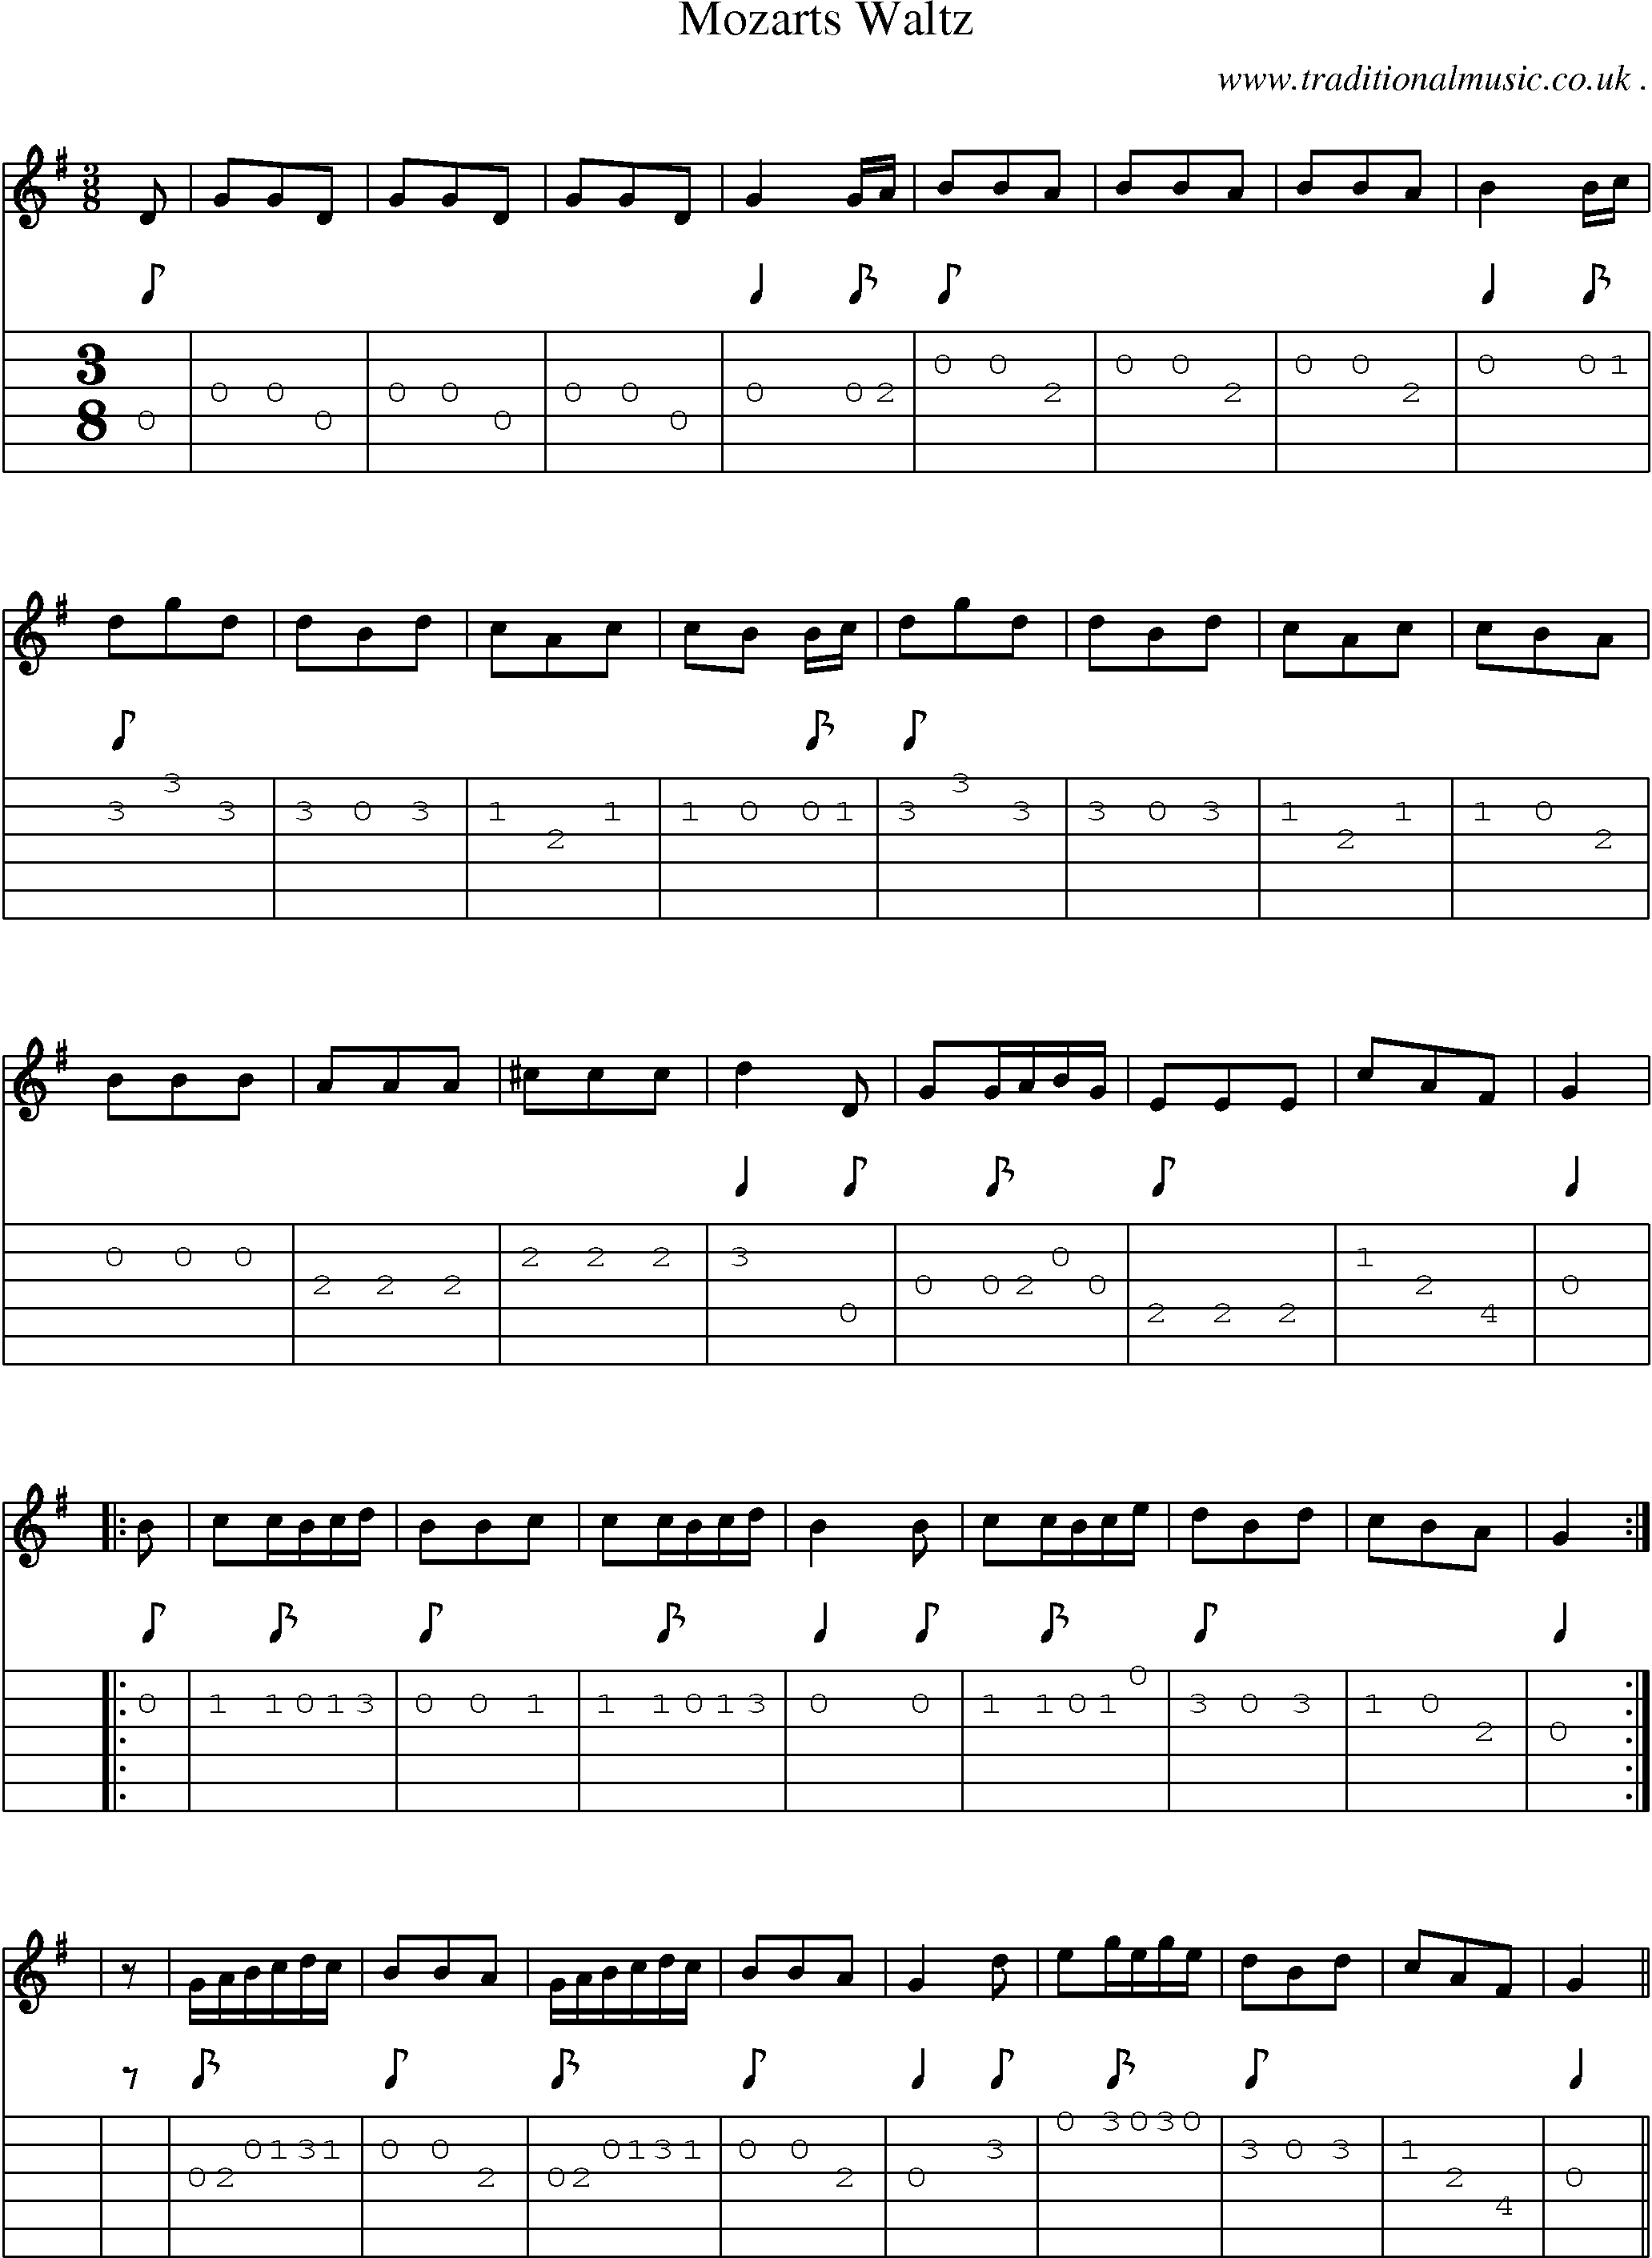 Sheet-Music and Guitar Tabs for Mozarts Waltz